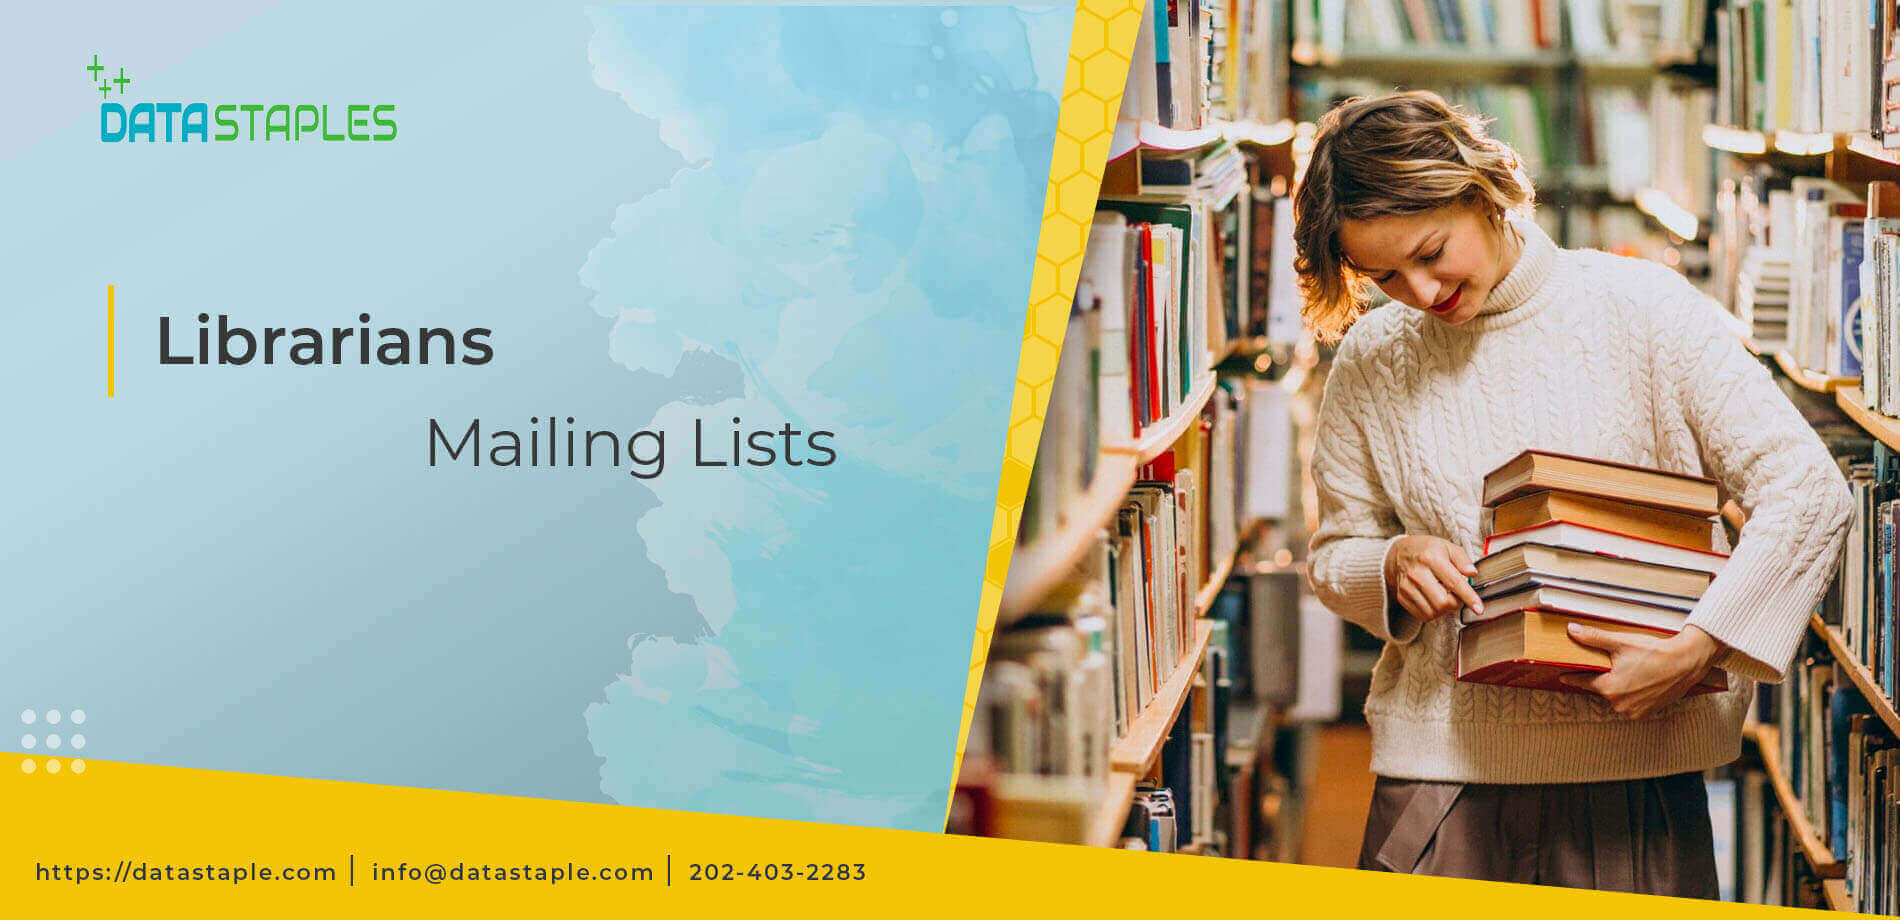 Librarians Mailing Lists | DataStaples